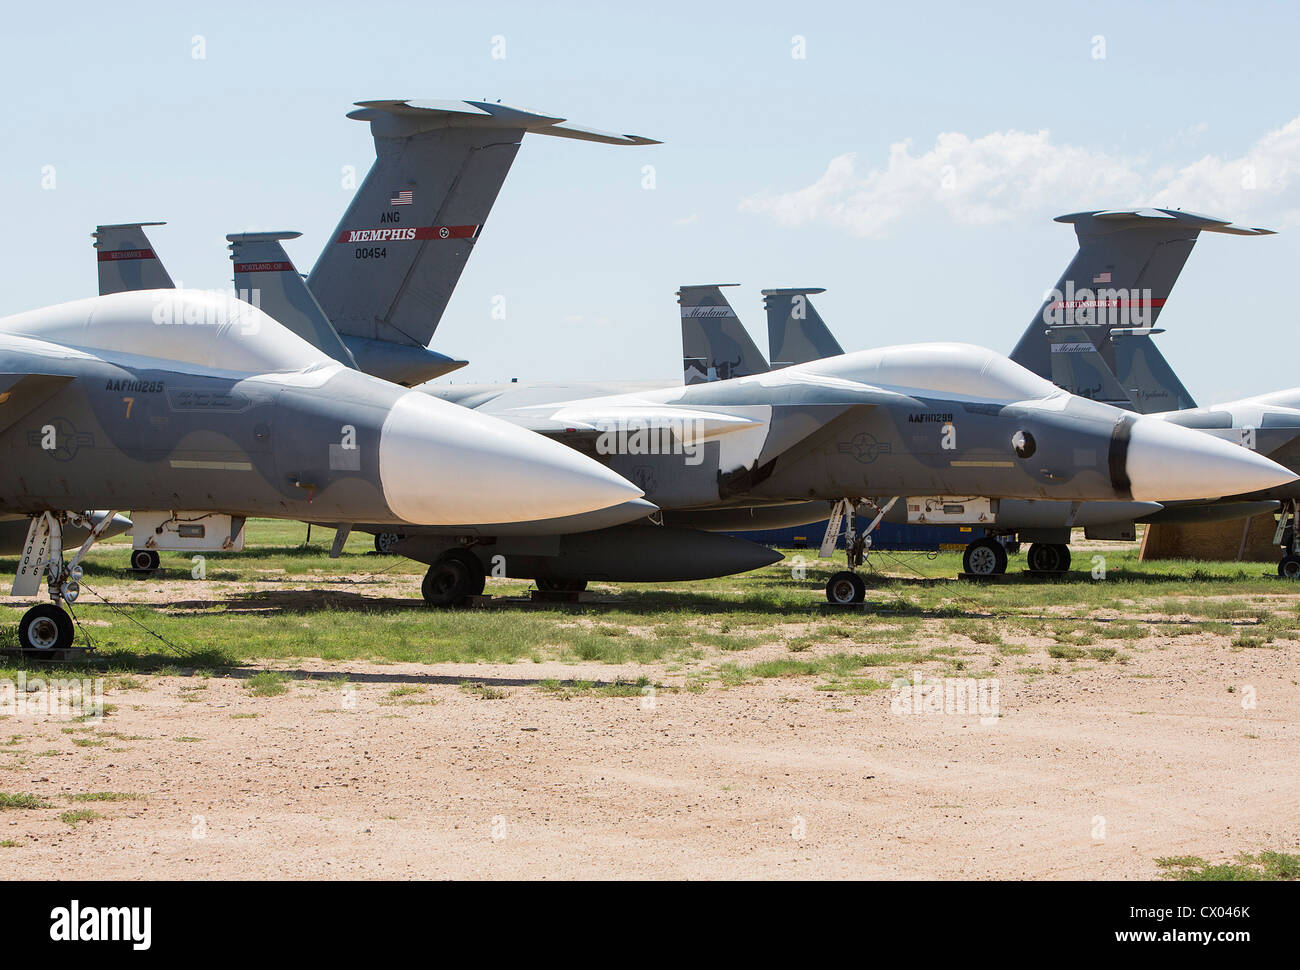 F-15 Eagle aircraft in storage at the 309th Aerospace Maintenance and Regeneration Group at Davis-Monthan Air Force Base. Stock Photo